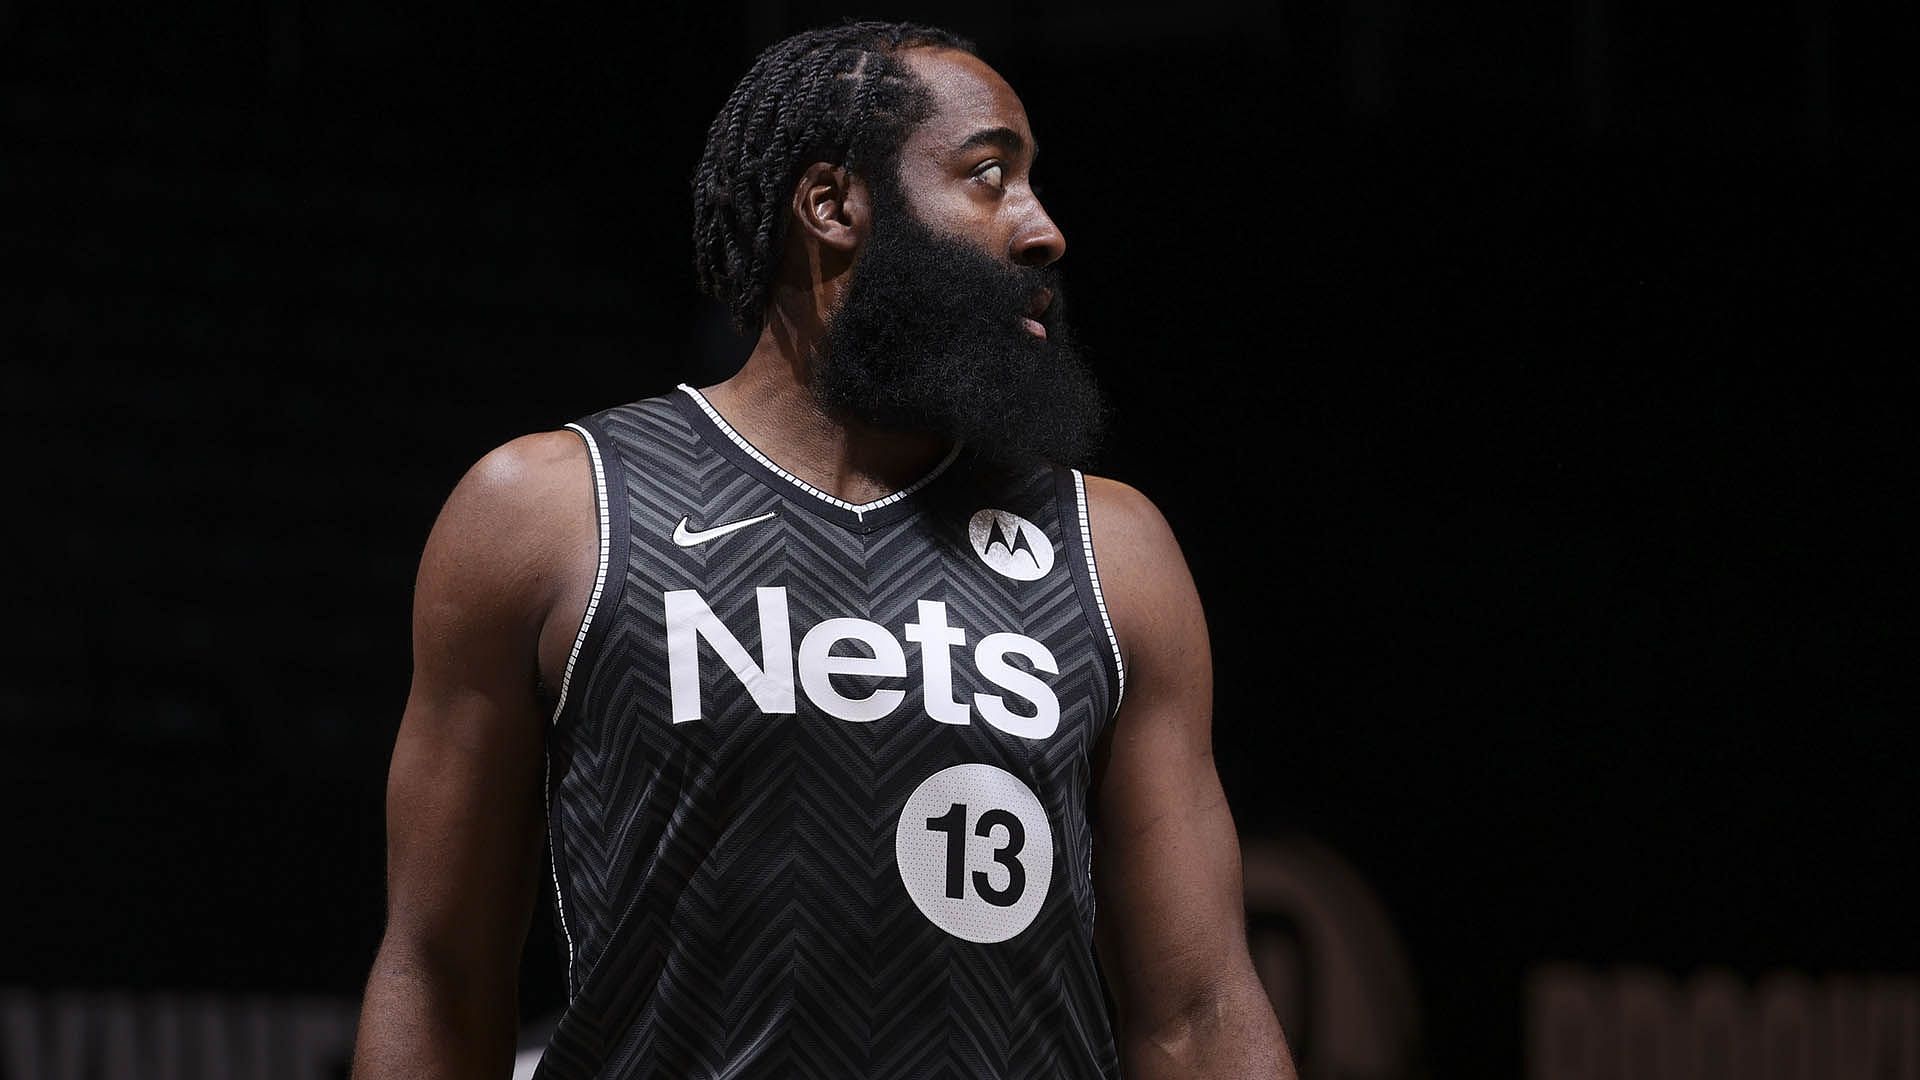 Brooklyn Nets star James Harden continues to be a bucket getting machine